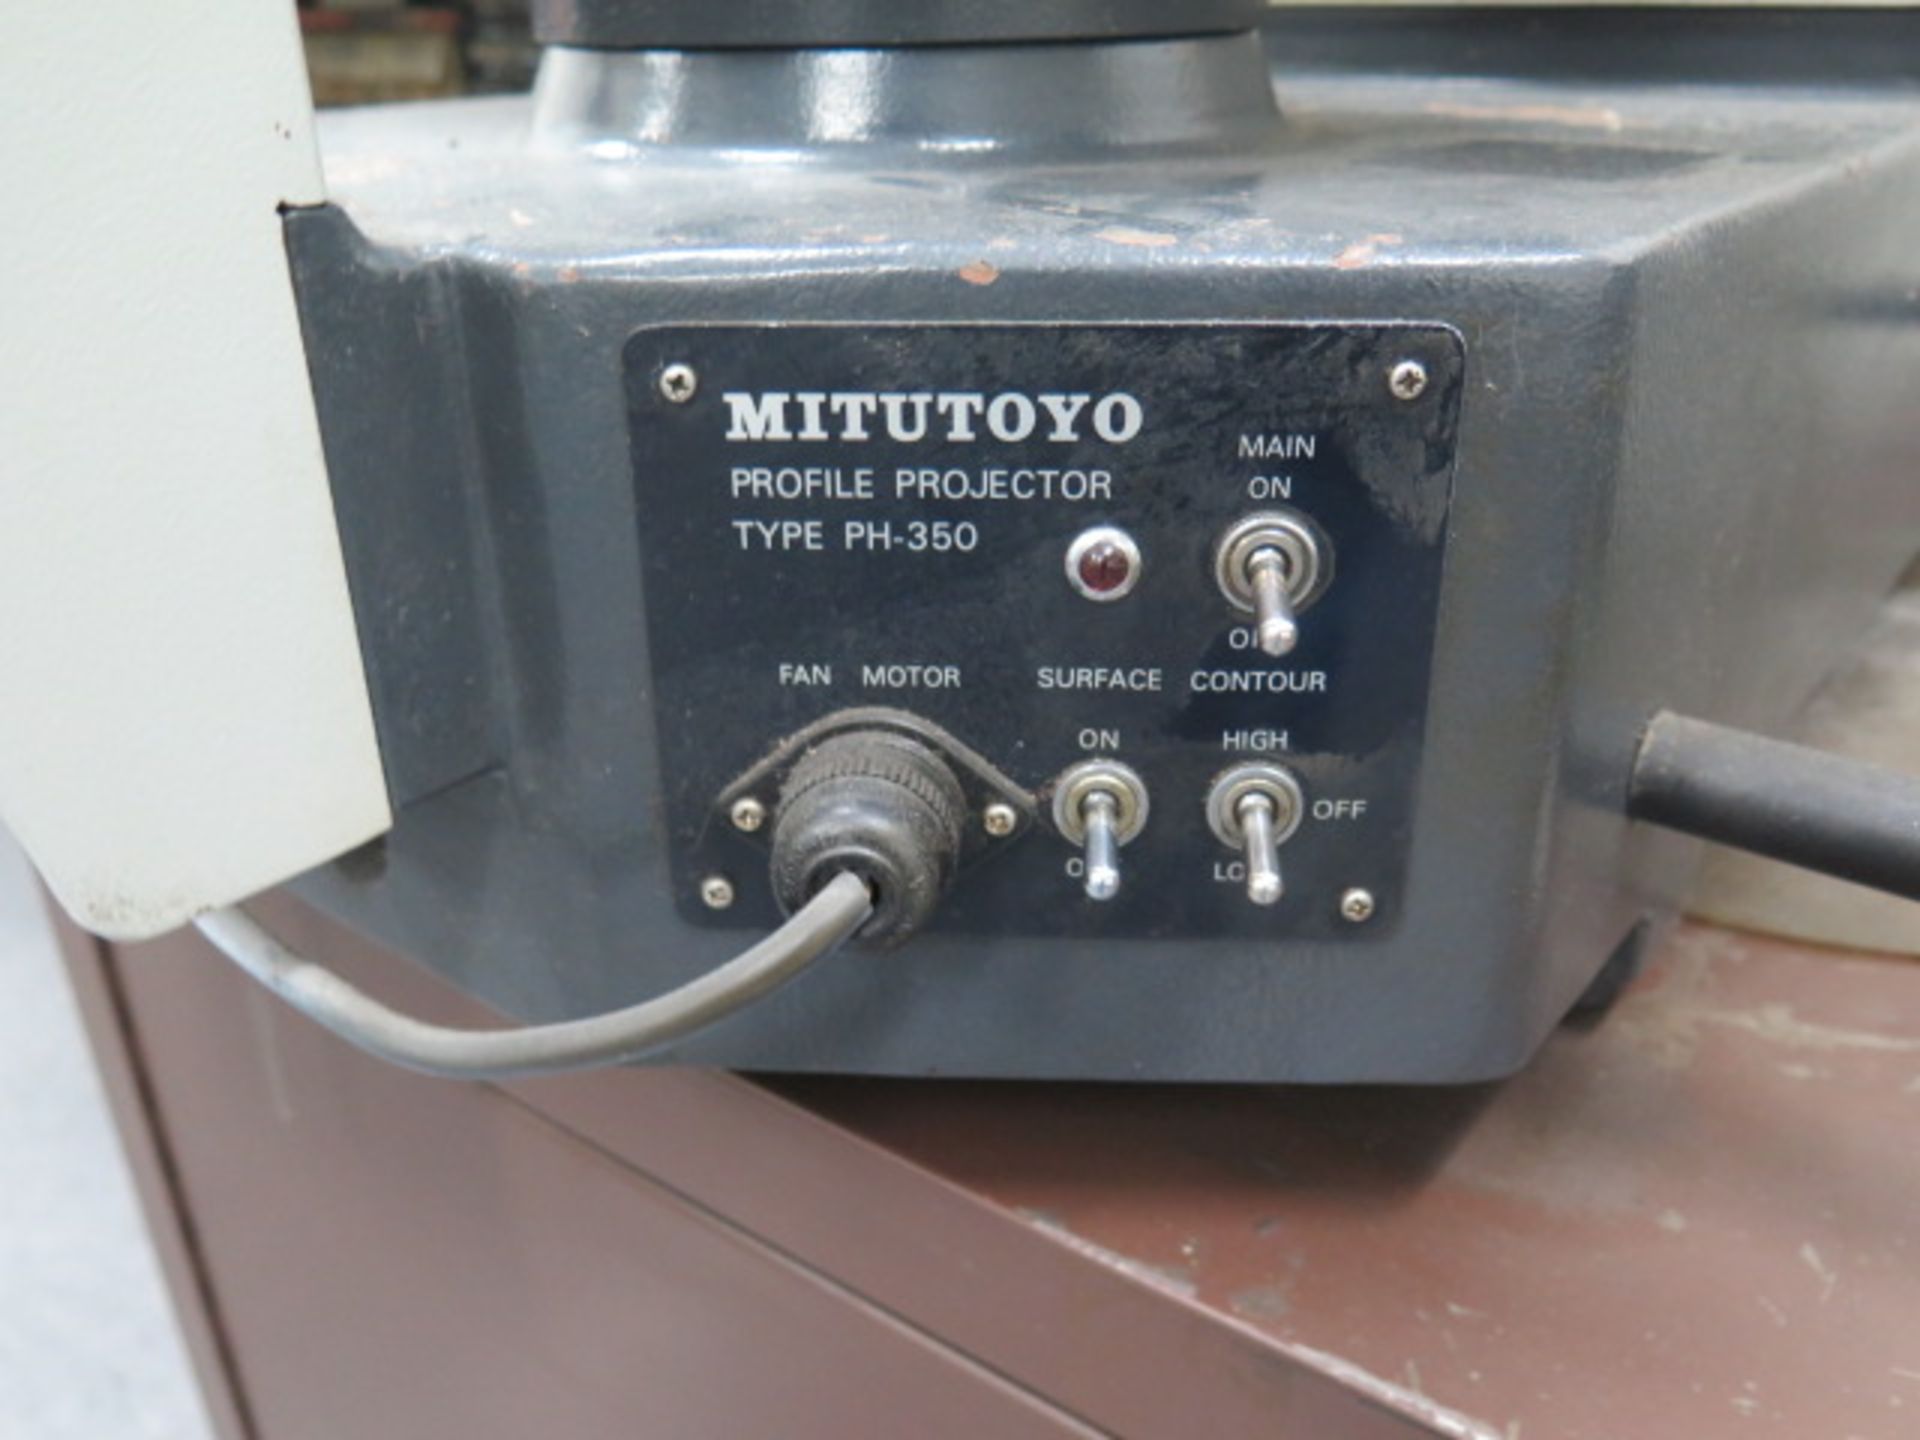 Mitutoyo PH-350 14” Optical Comparator s/n 9093w/ Micrometer Readout, Surface and Profile,SOLD AS IS - Image 7 of 8